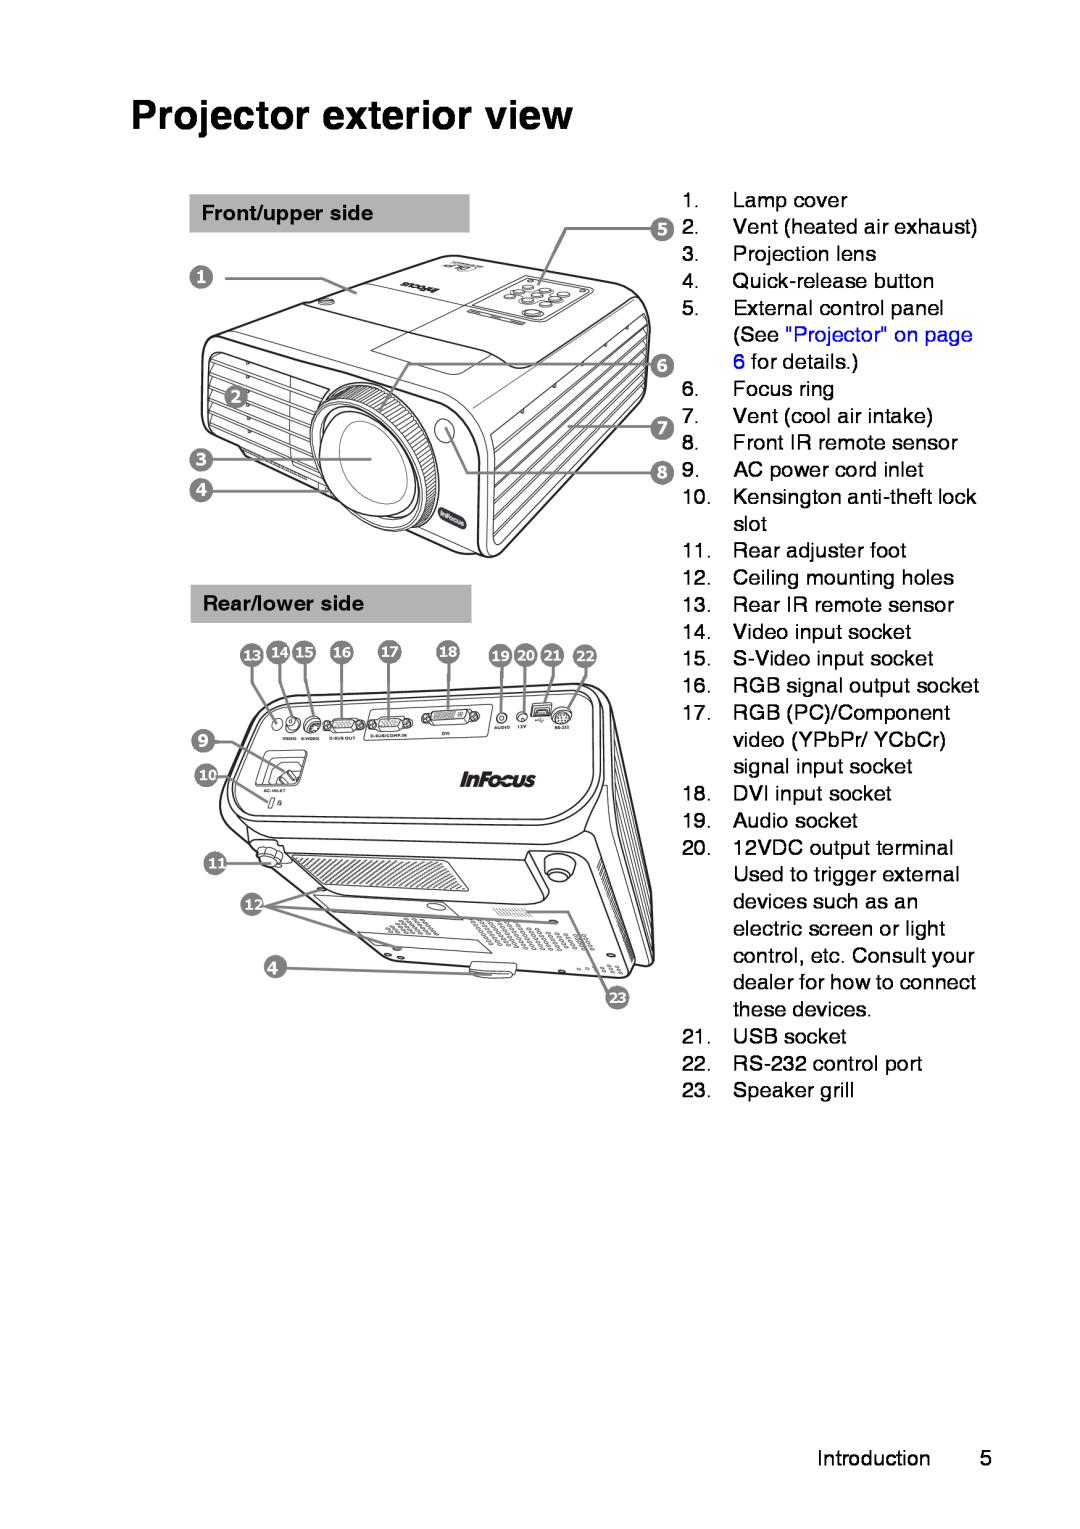 InFocus XS1 manual Projector exterior view, Front/upper side, Rear/lower side, See Projector on page 